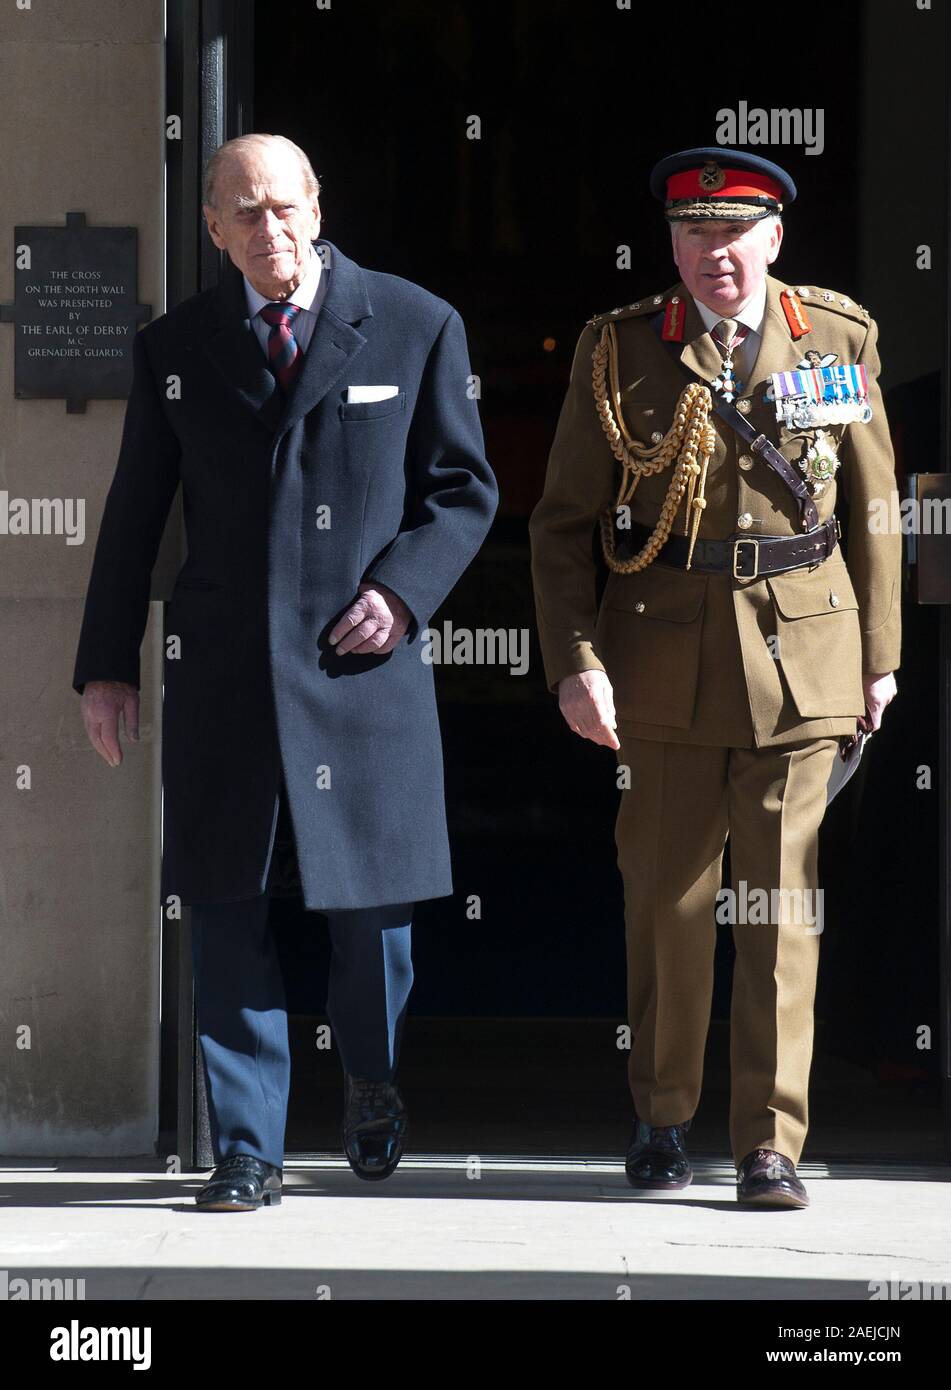 The Duke of Edinburgh with General Lord Dannatt attending a service for the 175th anniversary of the Soldier's and Airmen's scripture Association at the Guards Chapel in London. Stock Photo